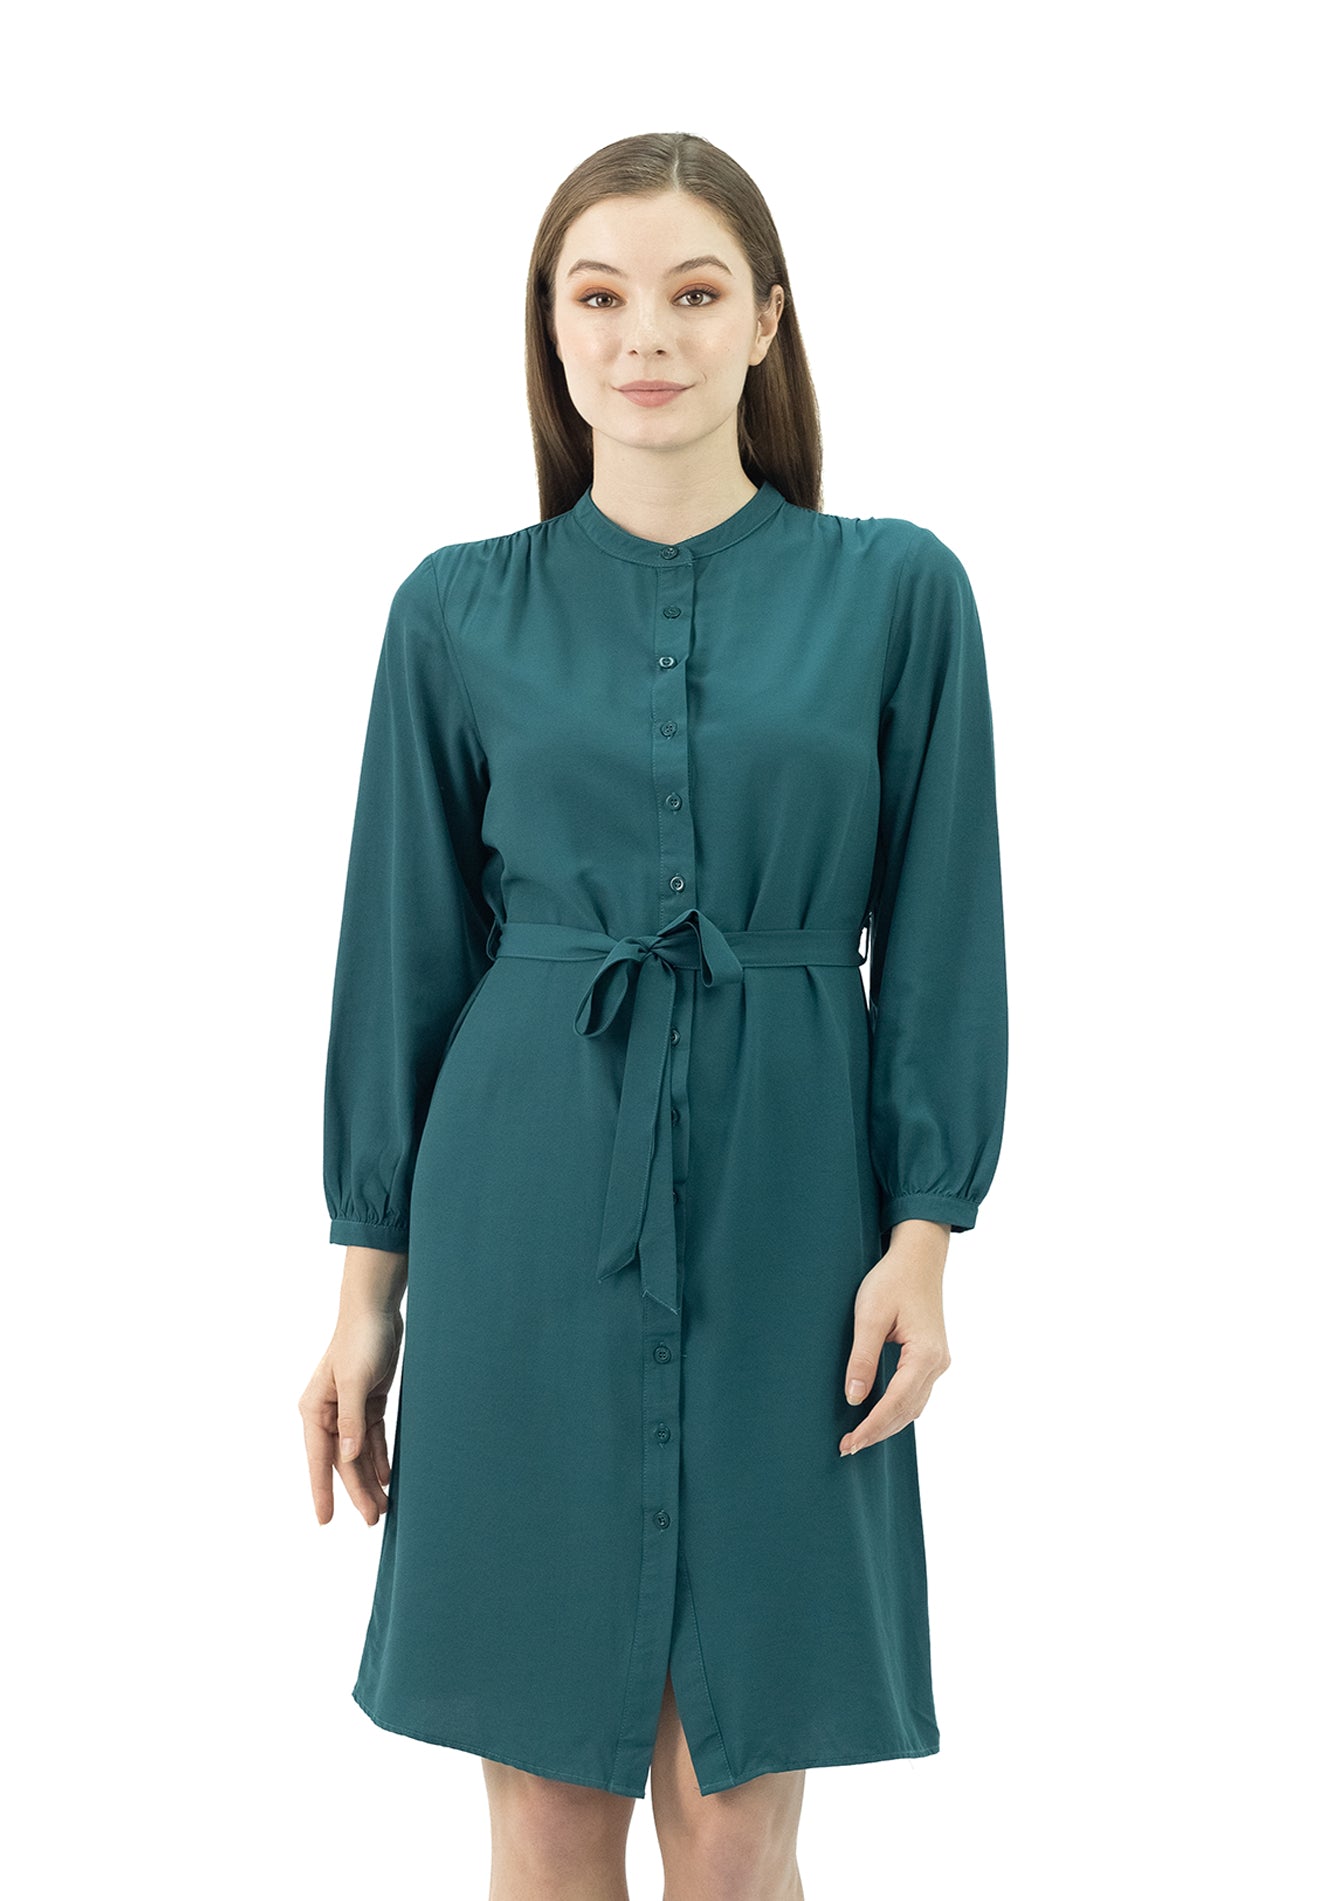 DAISY BY VOIR Band Collar Belted Dress